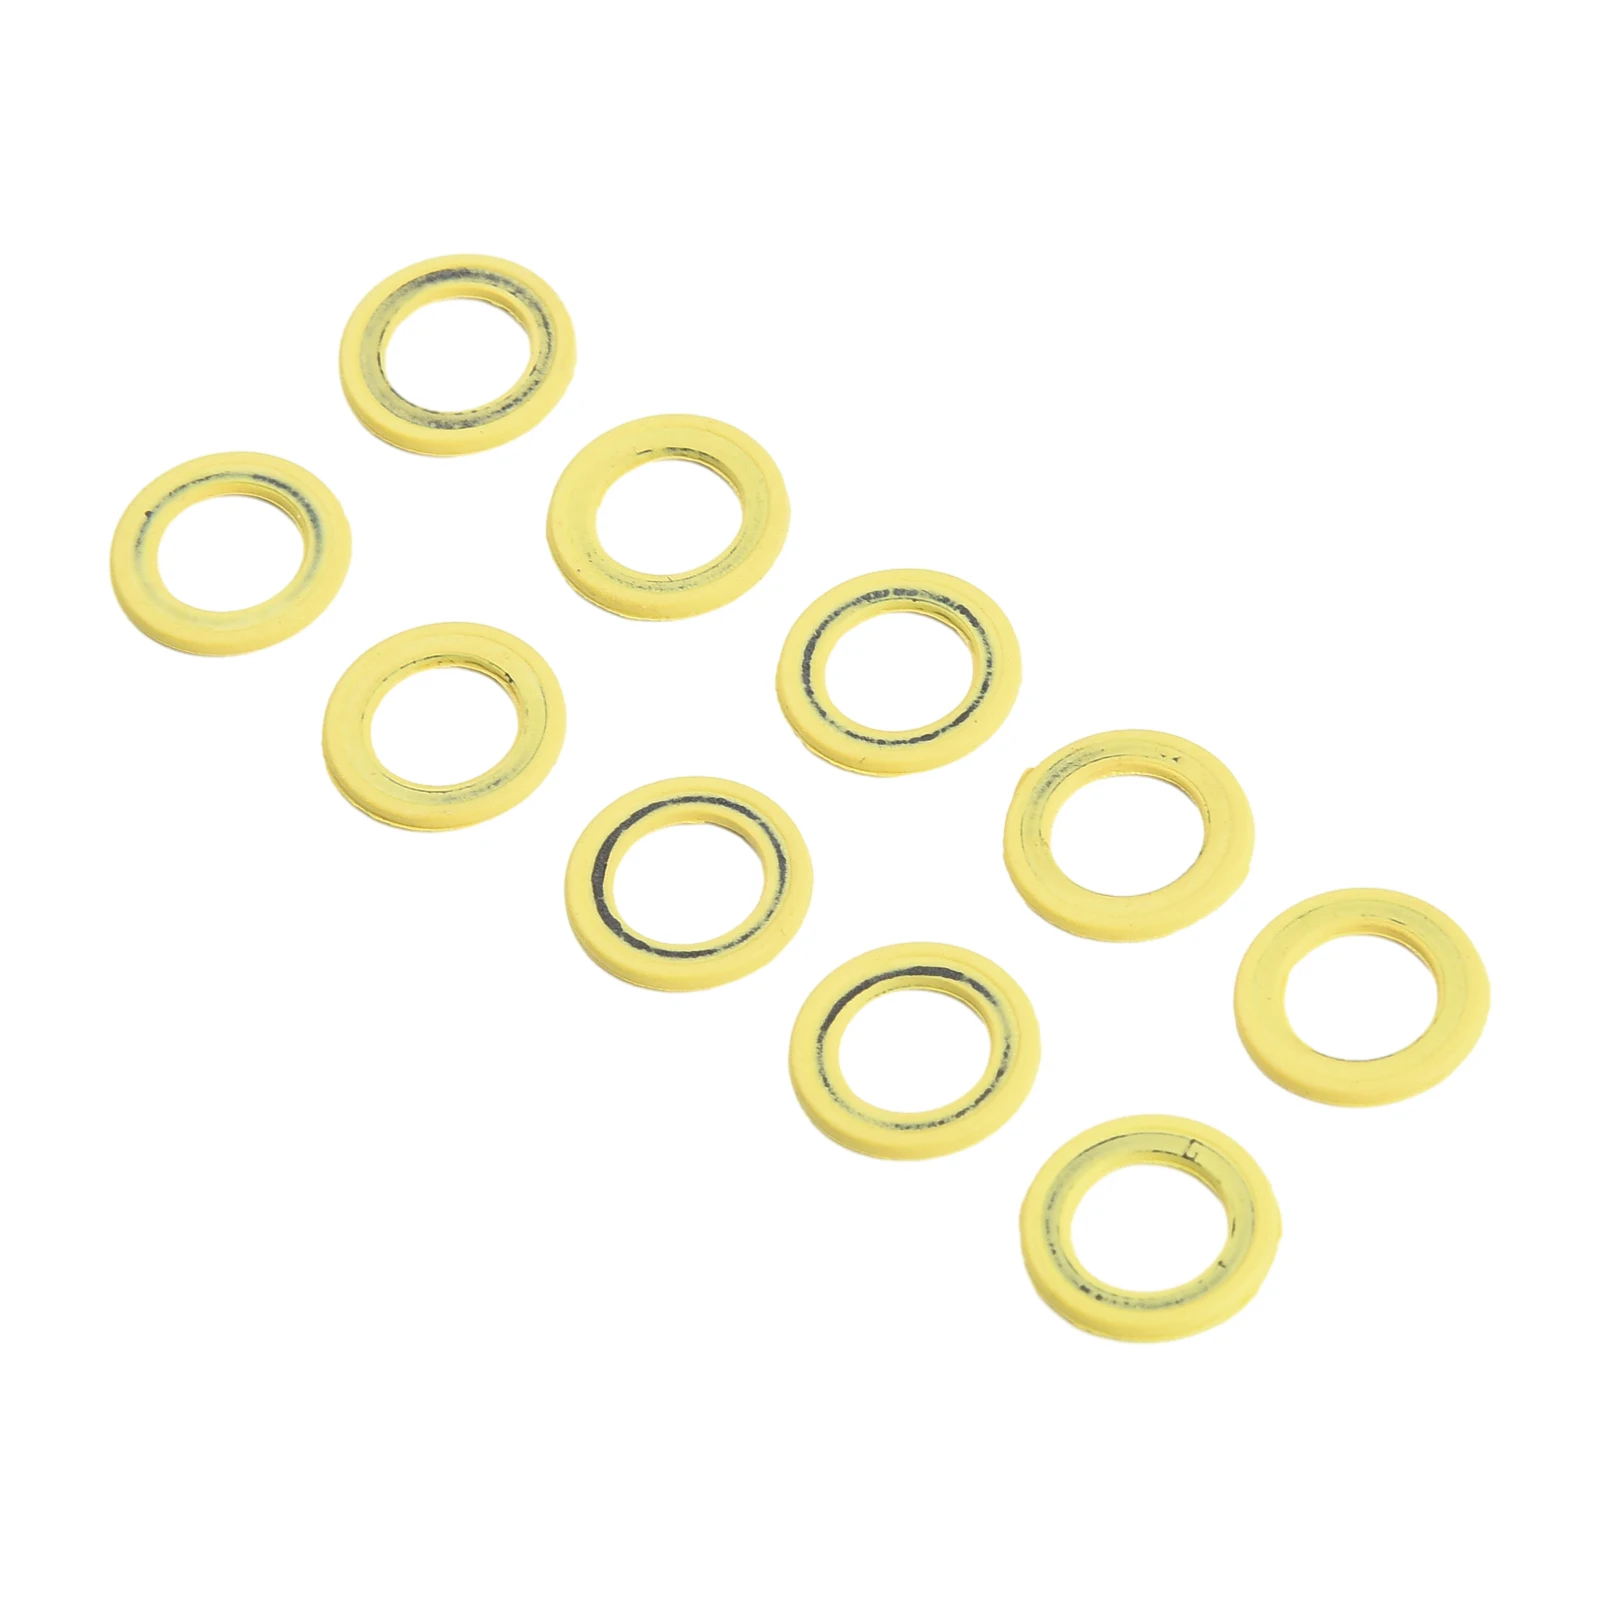 10x Drain Screw Seal Washer 268M0204693 26830749  Tough and Long lasting  Compatible with 26 830749 for Mercury For Marine genuine fuel injector washer gasket screw seal repair kit for ssangyong stavic rexton korando c 671017kt21